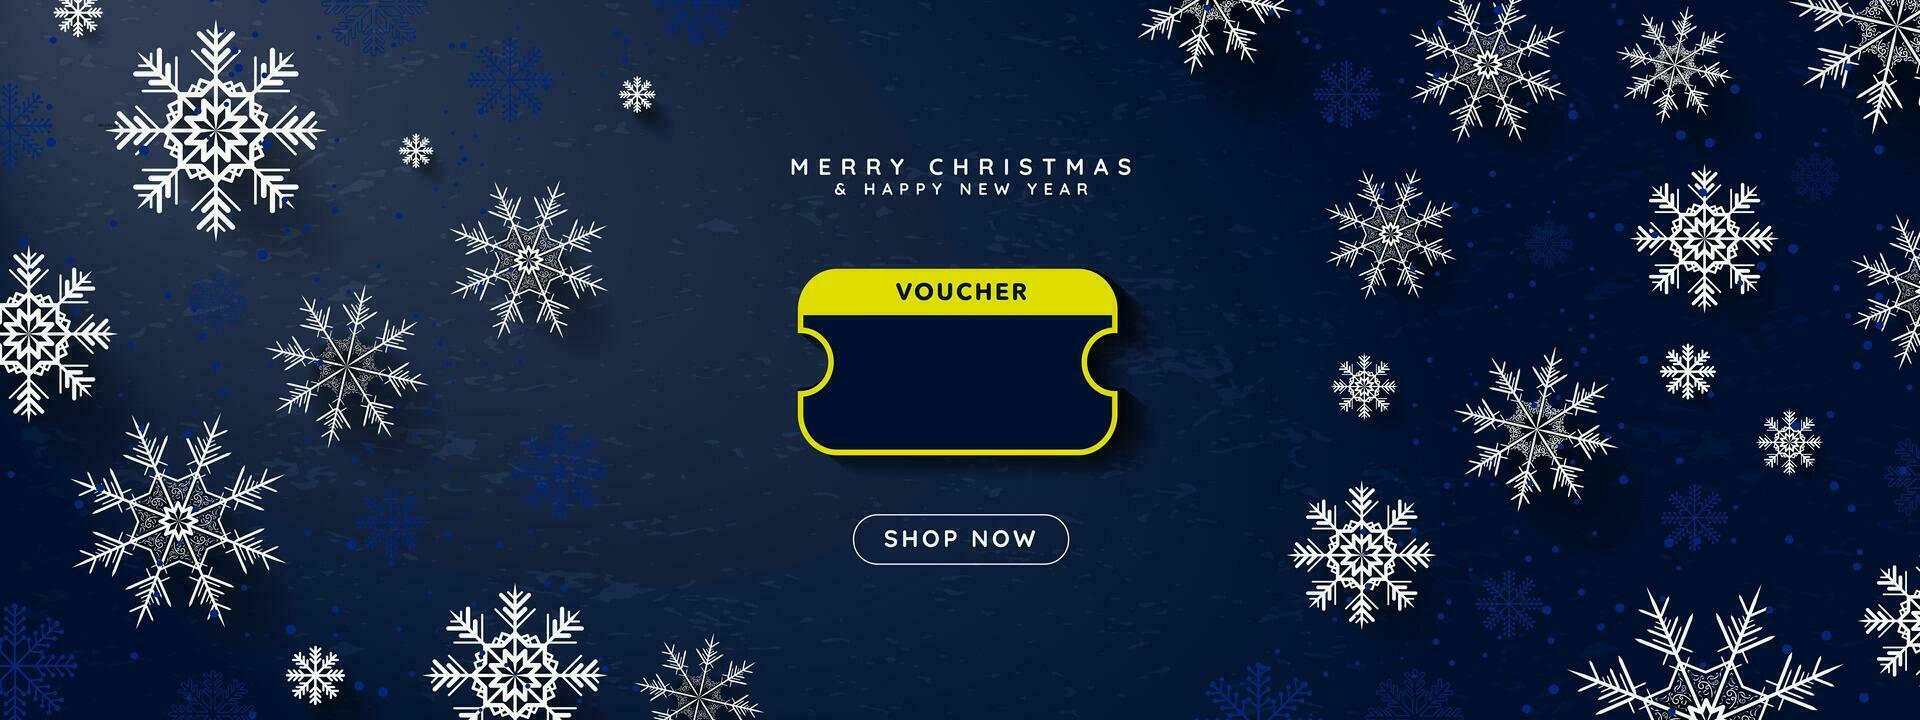 Simple Yellow and Dark Blue Online Christmas blank Voucher decorative Christmas elements and Shop Now CTA Button. Christmas Coupon template with copy space. Editable Vector Illustration. EPS 10.